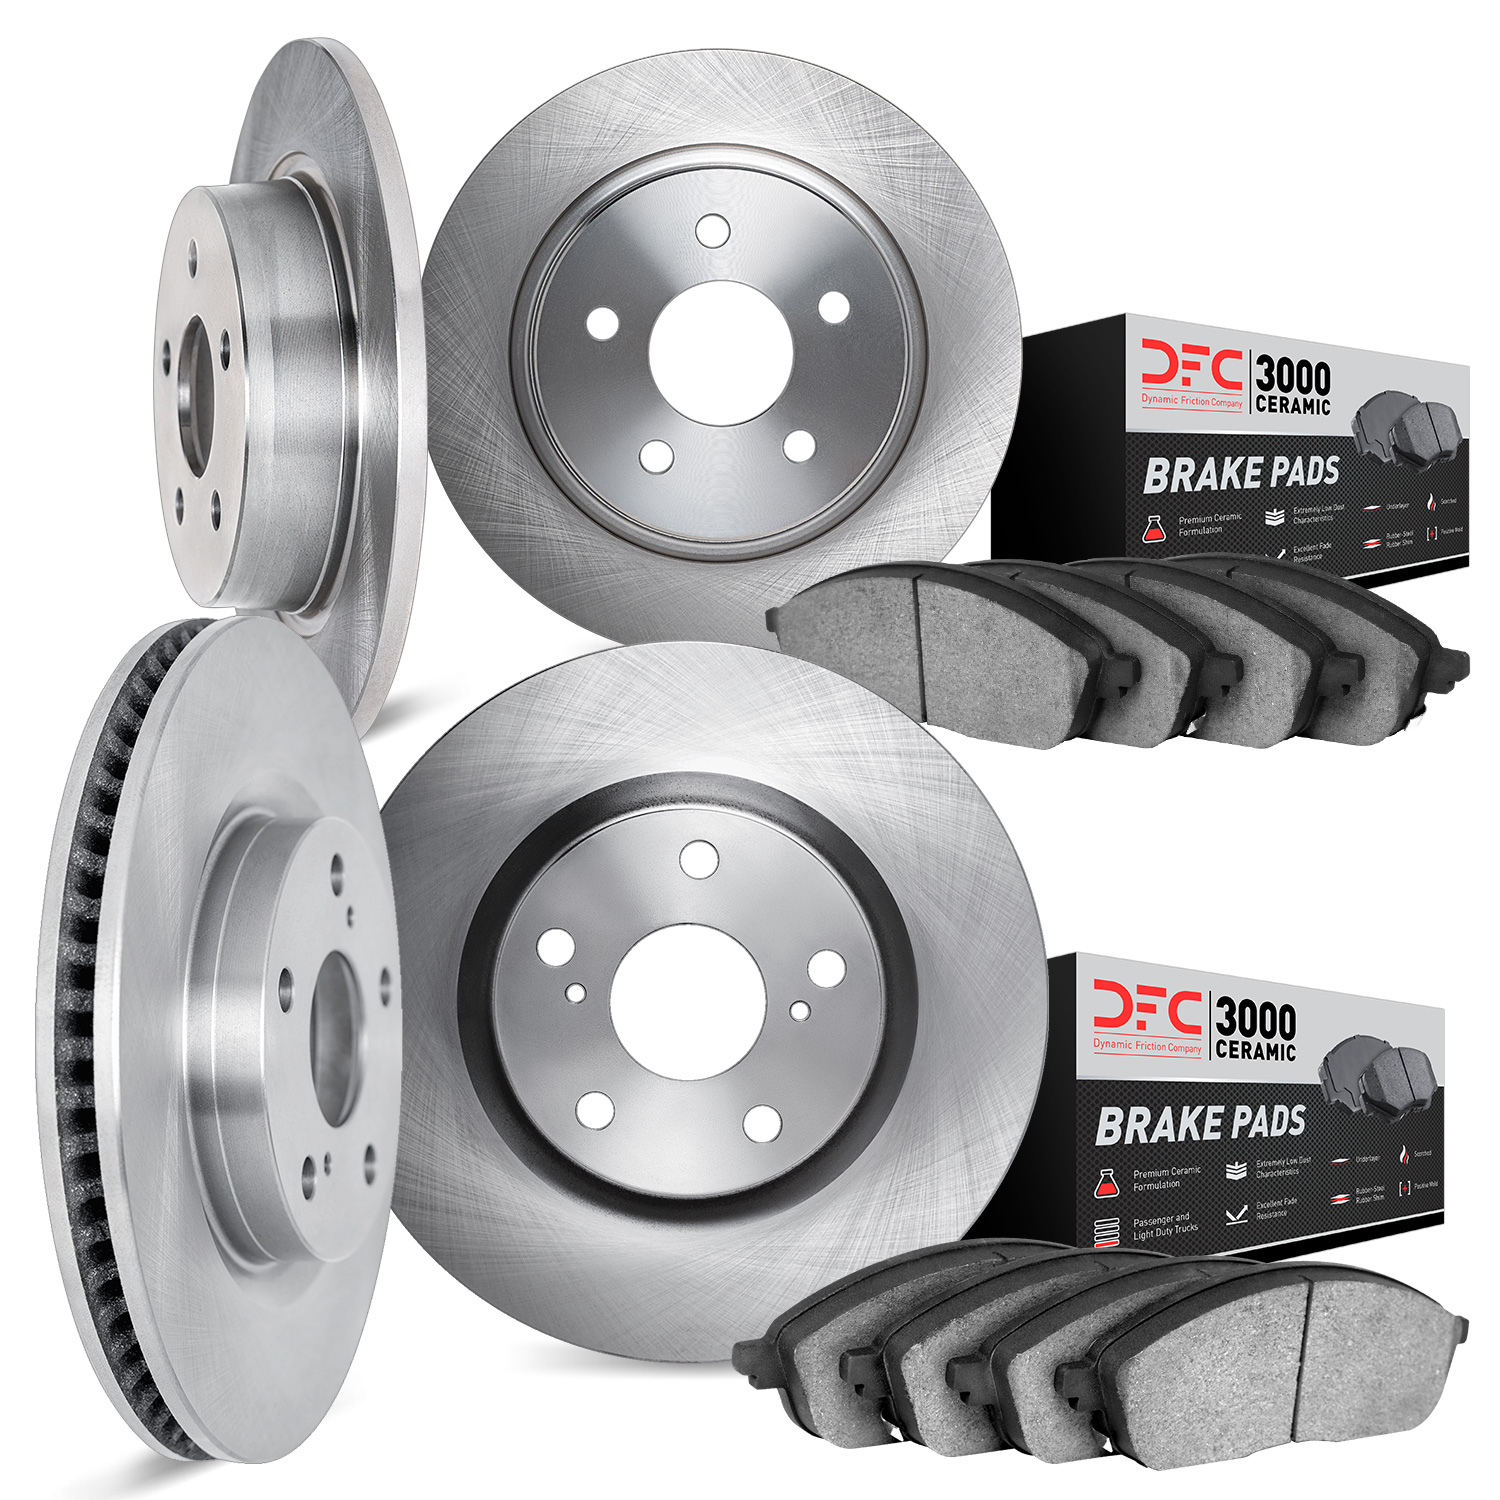 6304-76057 Brake Rotors with 3000-Series Ceramic Brake Pads Kit, 2002-2006 Lexus/Toyota/Scion, Position: Front and Rear